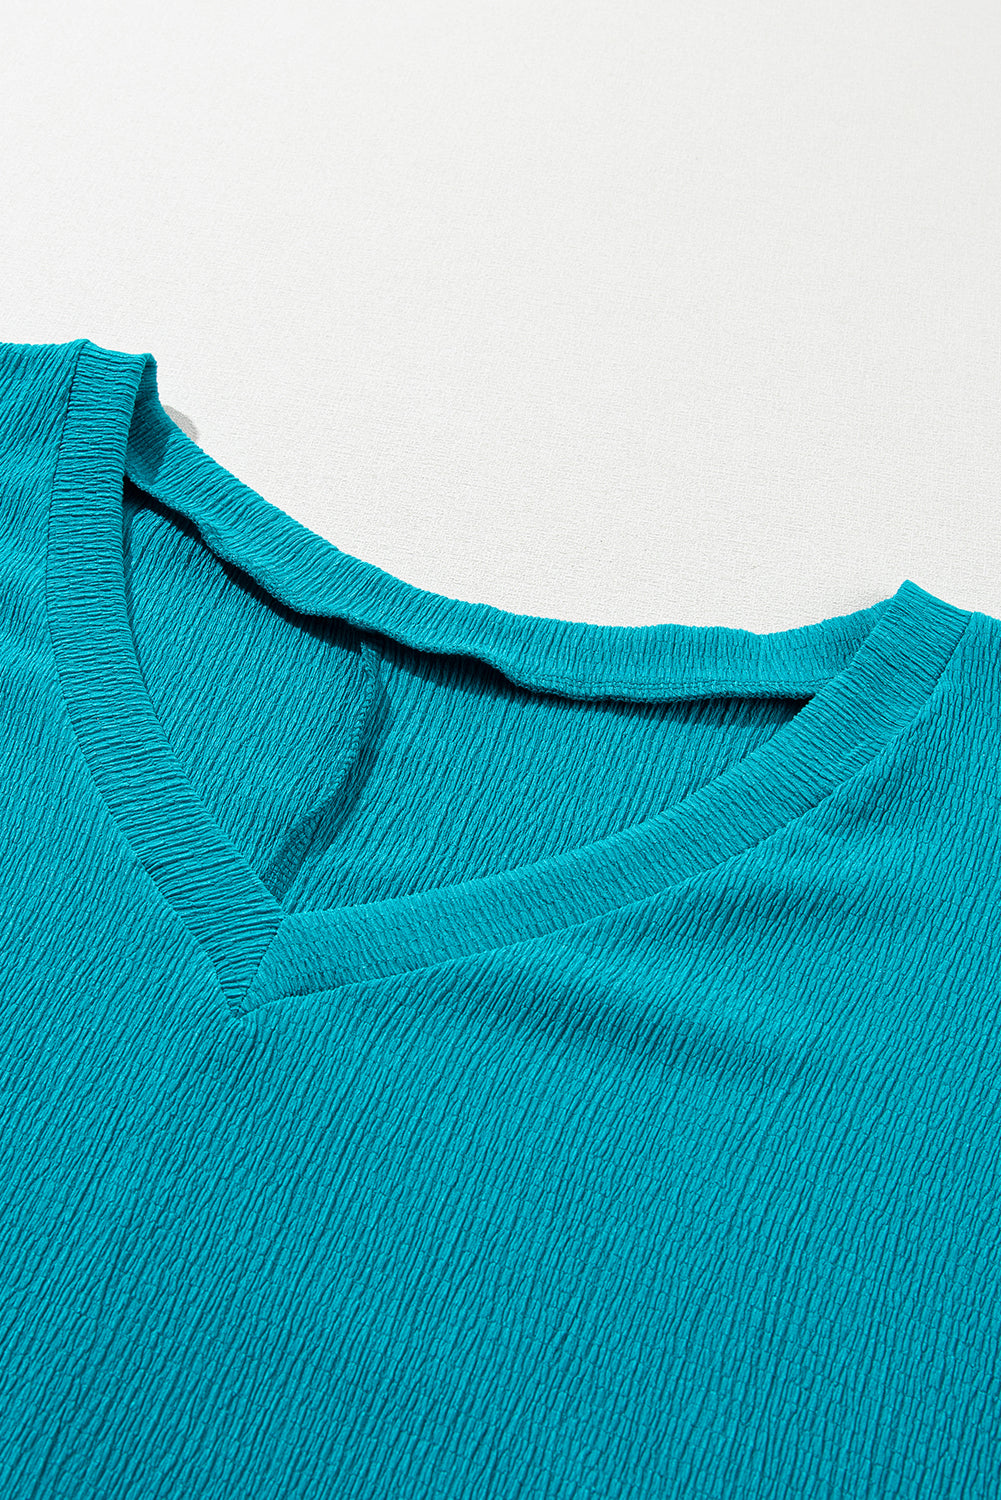 Teal Textured V-neck Plus Size Top